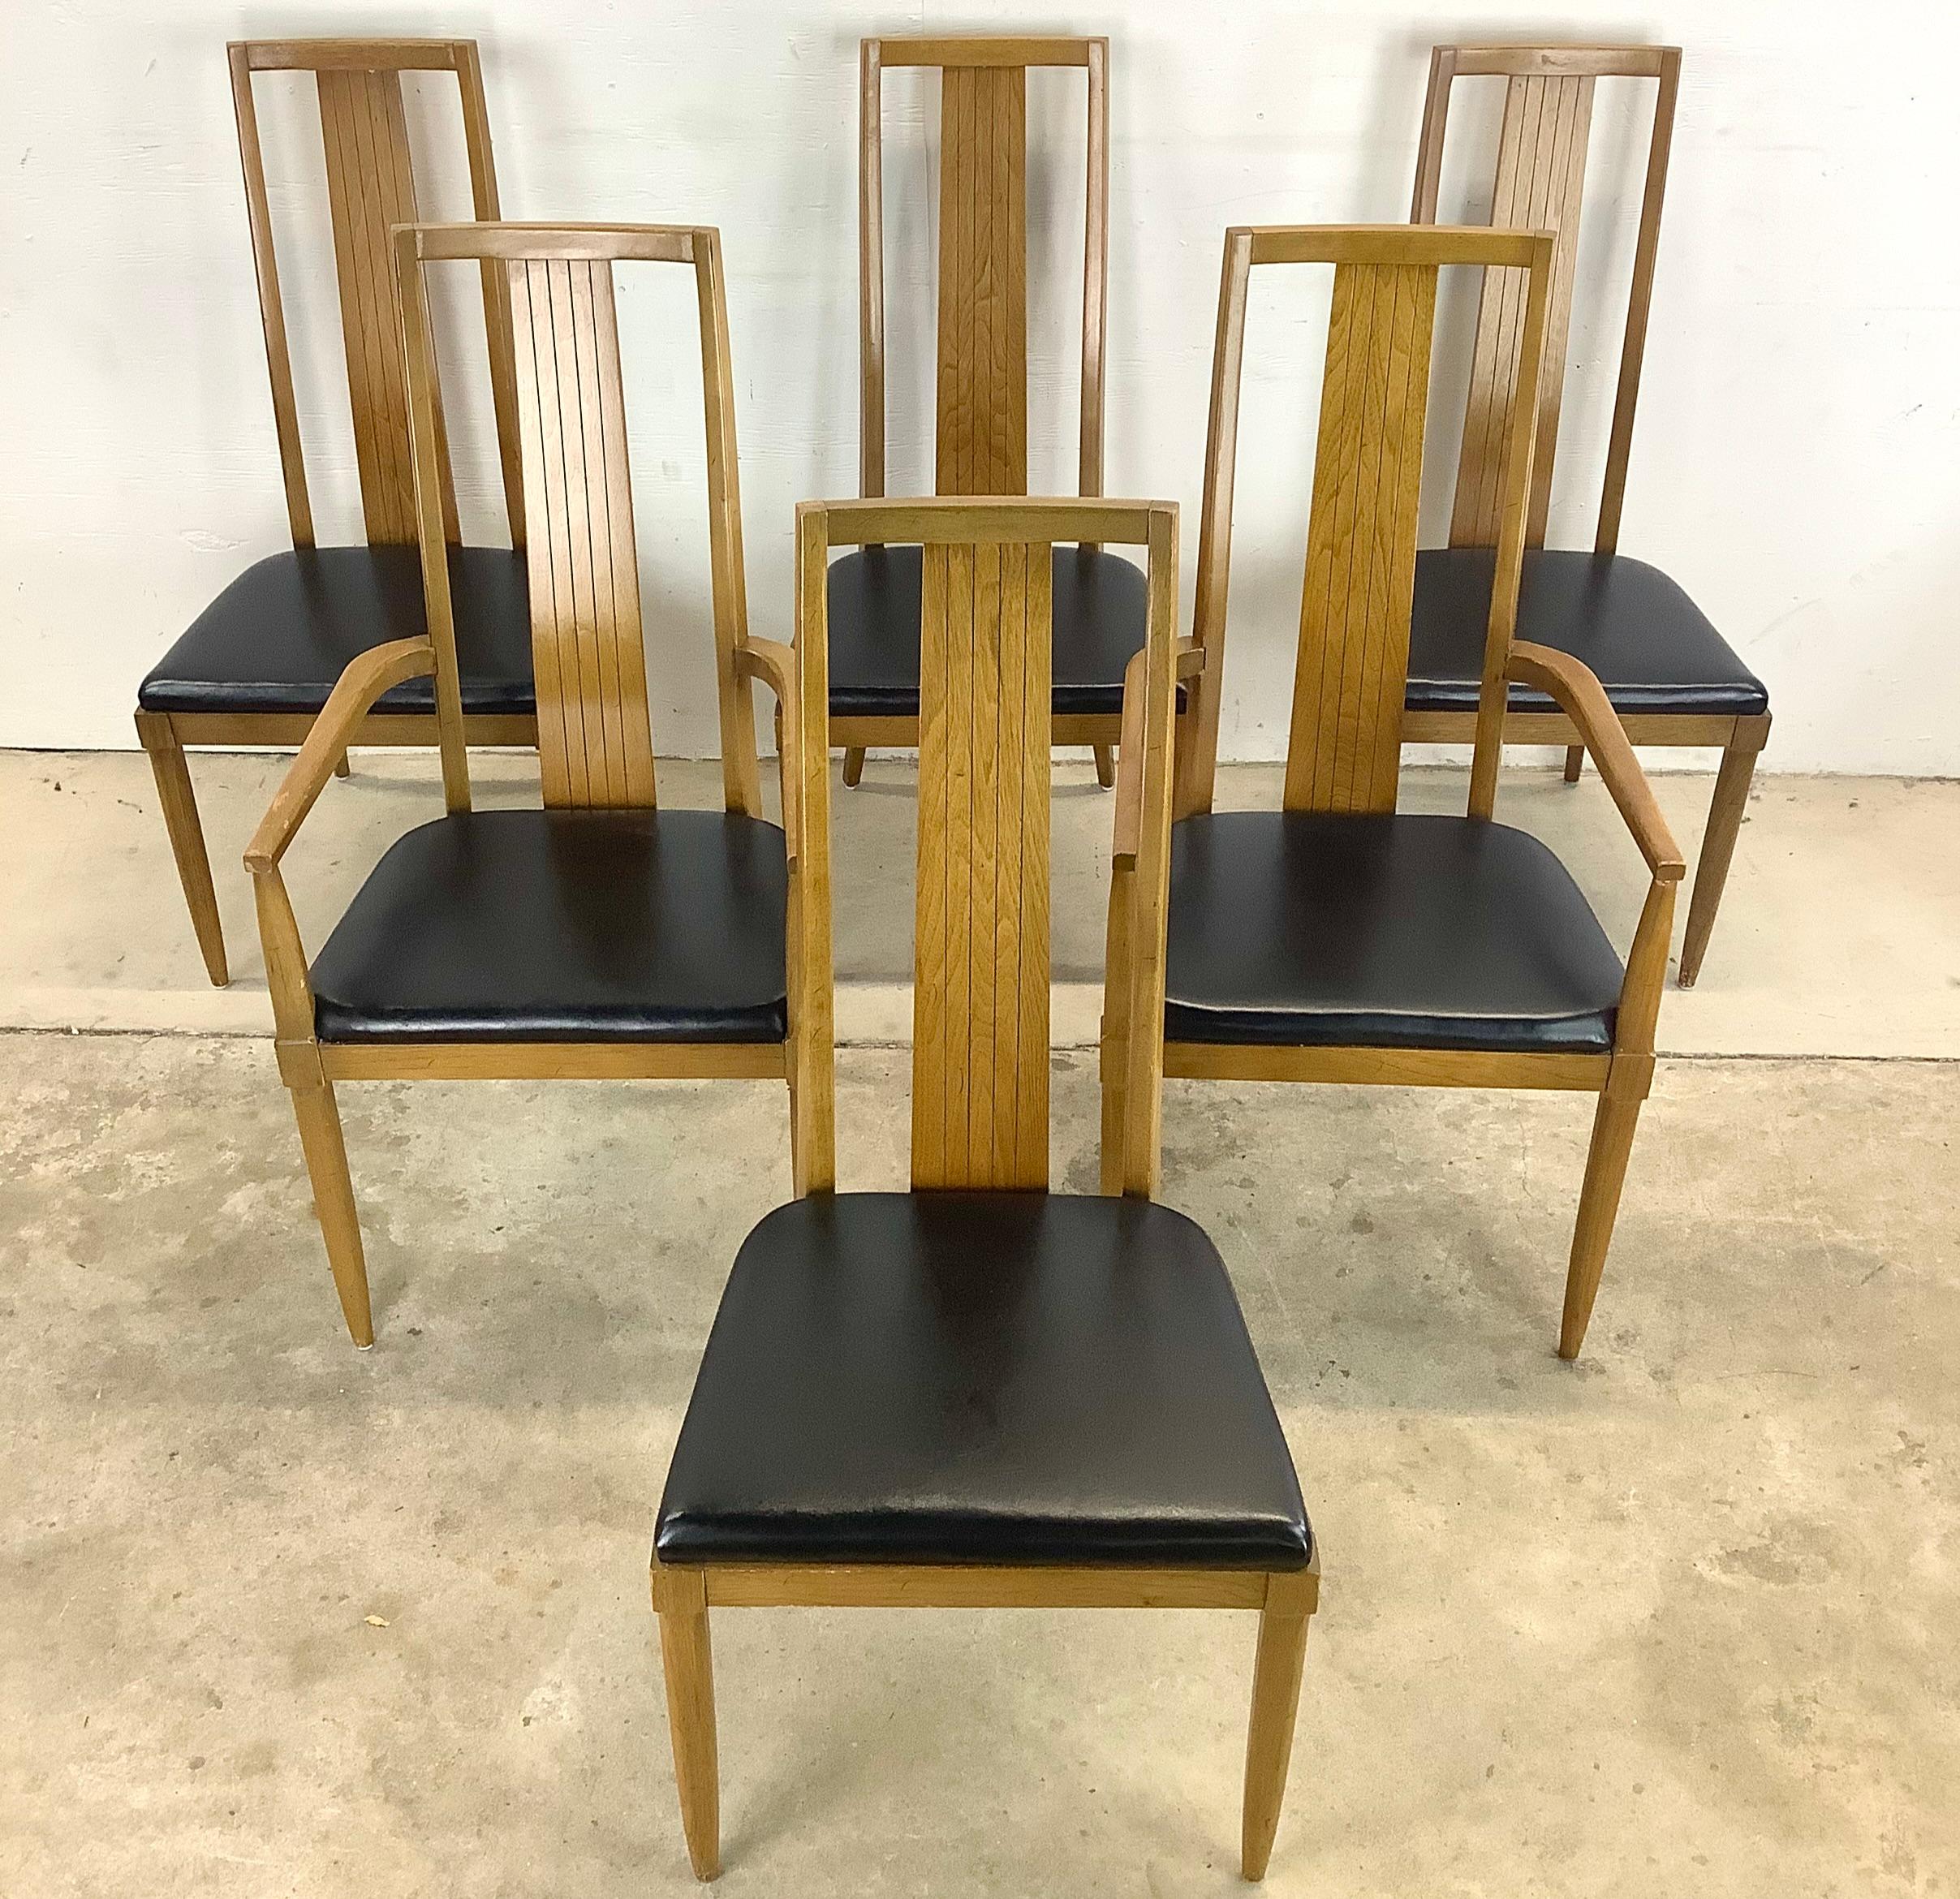 This matching set of six dining chairs from the Tomlinson 